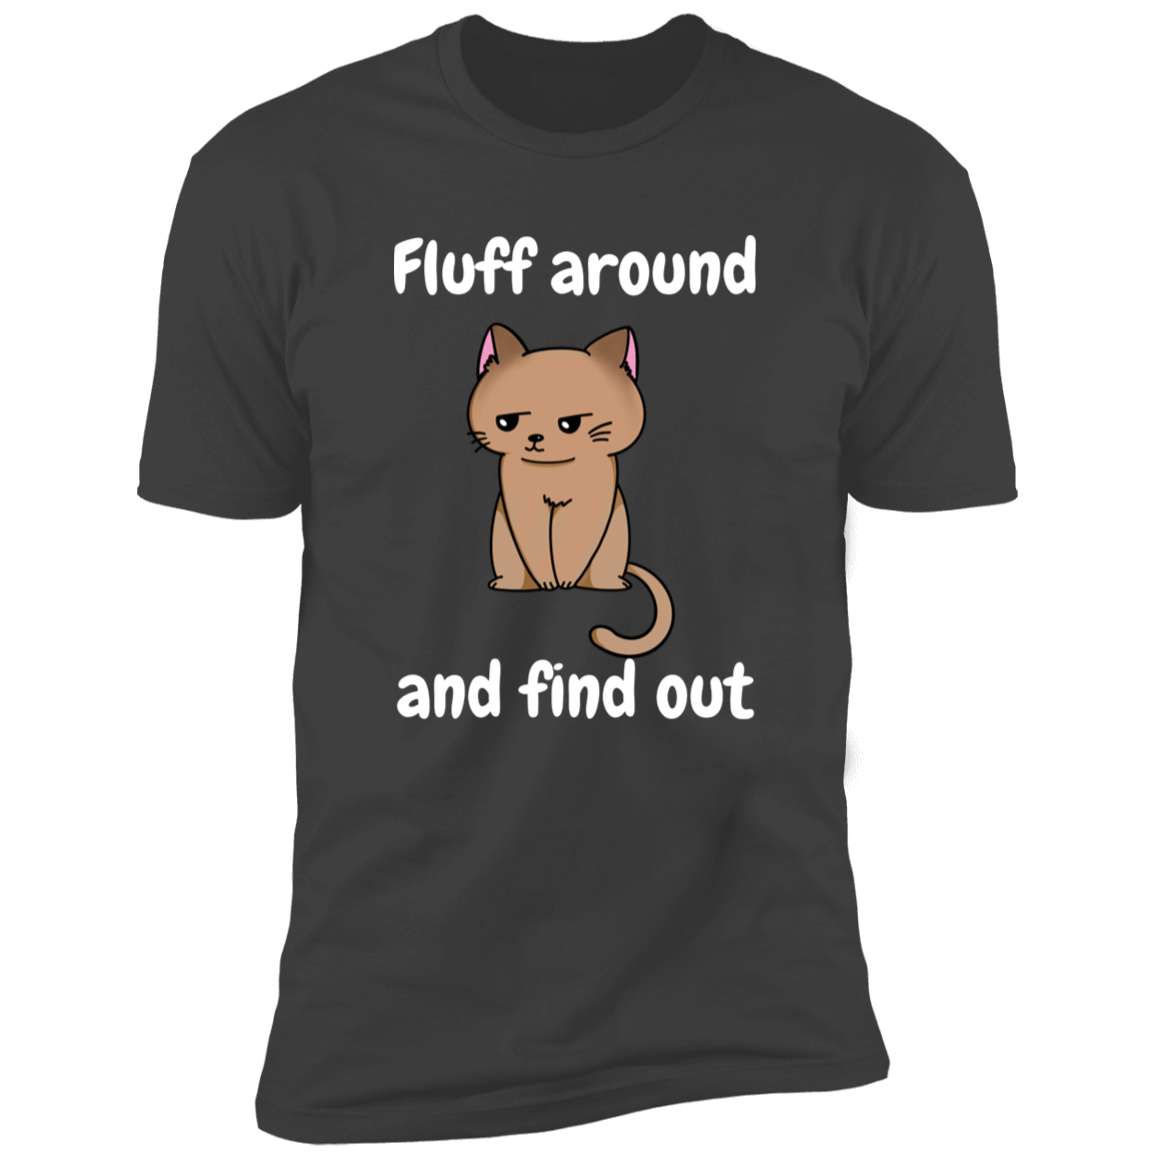 Fluff Around and Find Out Cat Shirt, funny cat shirt, funny cat shirt for humans, in heavy metal gray